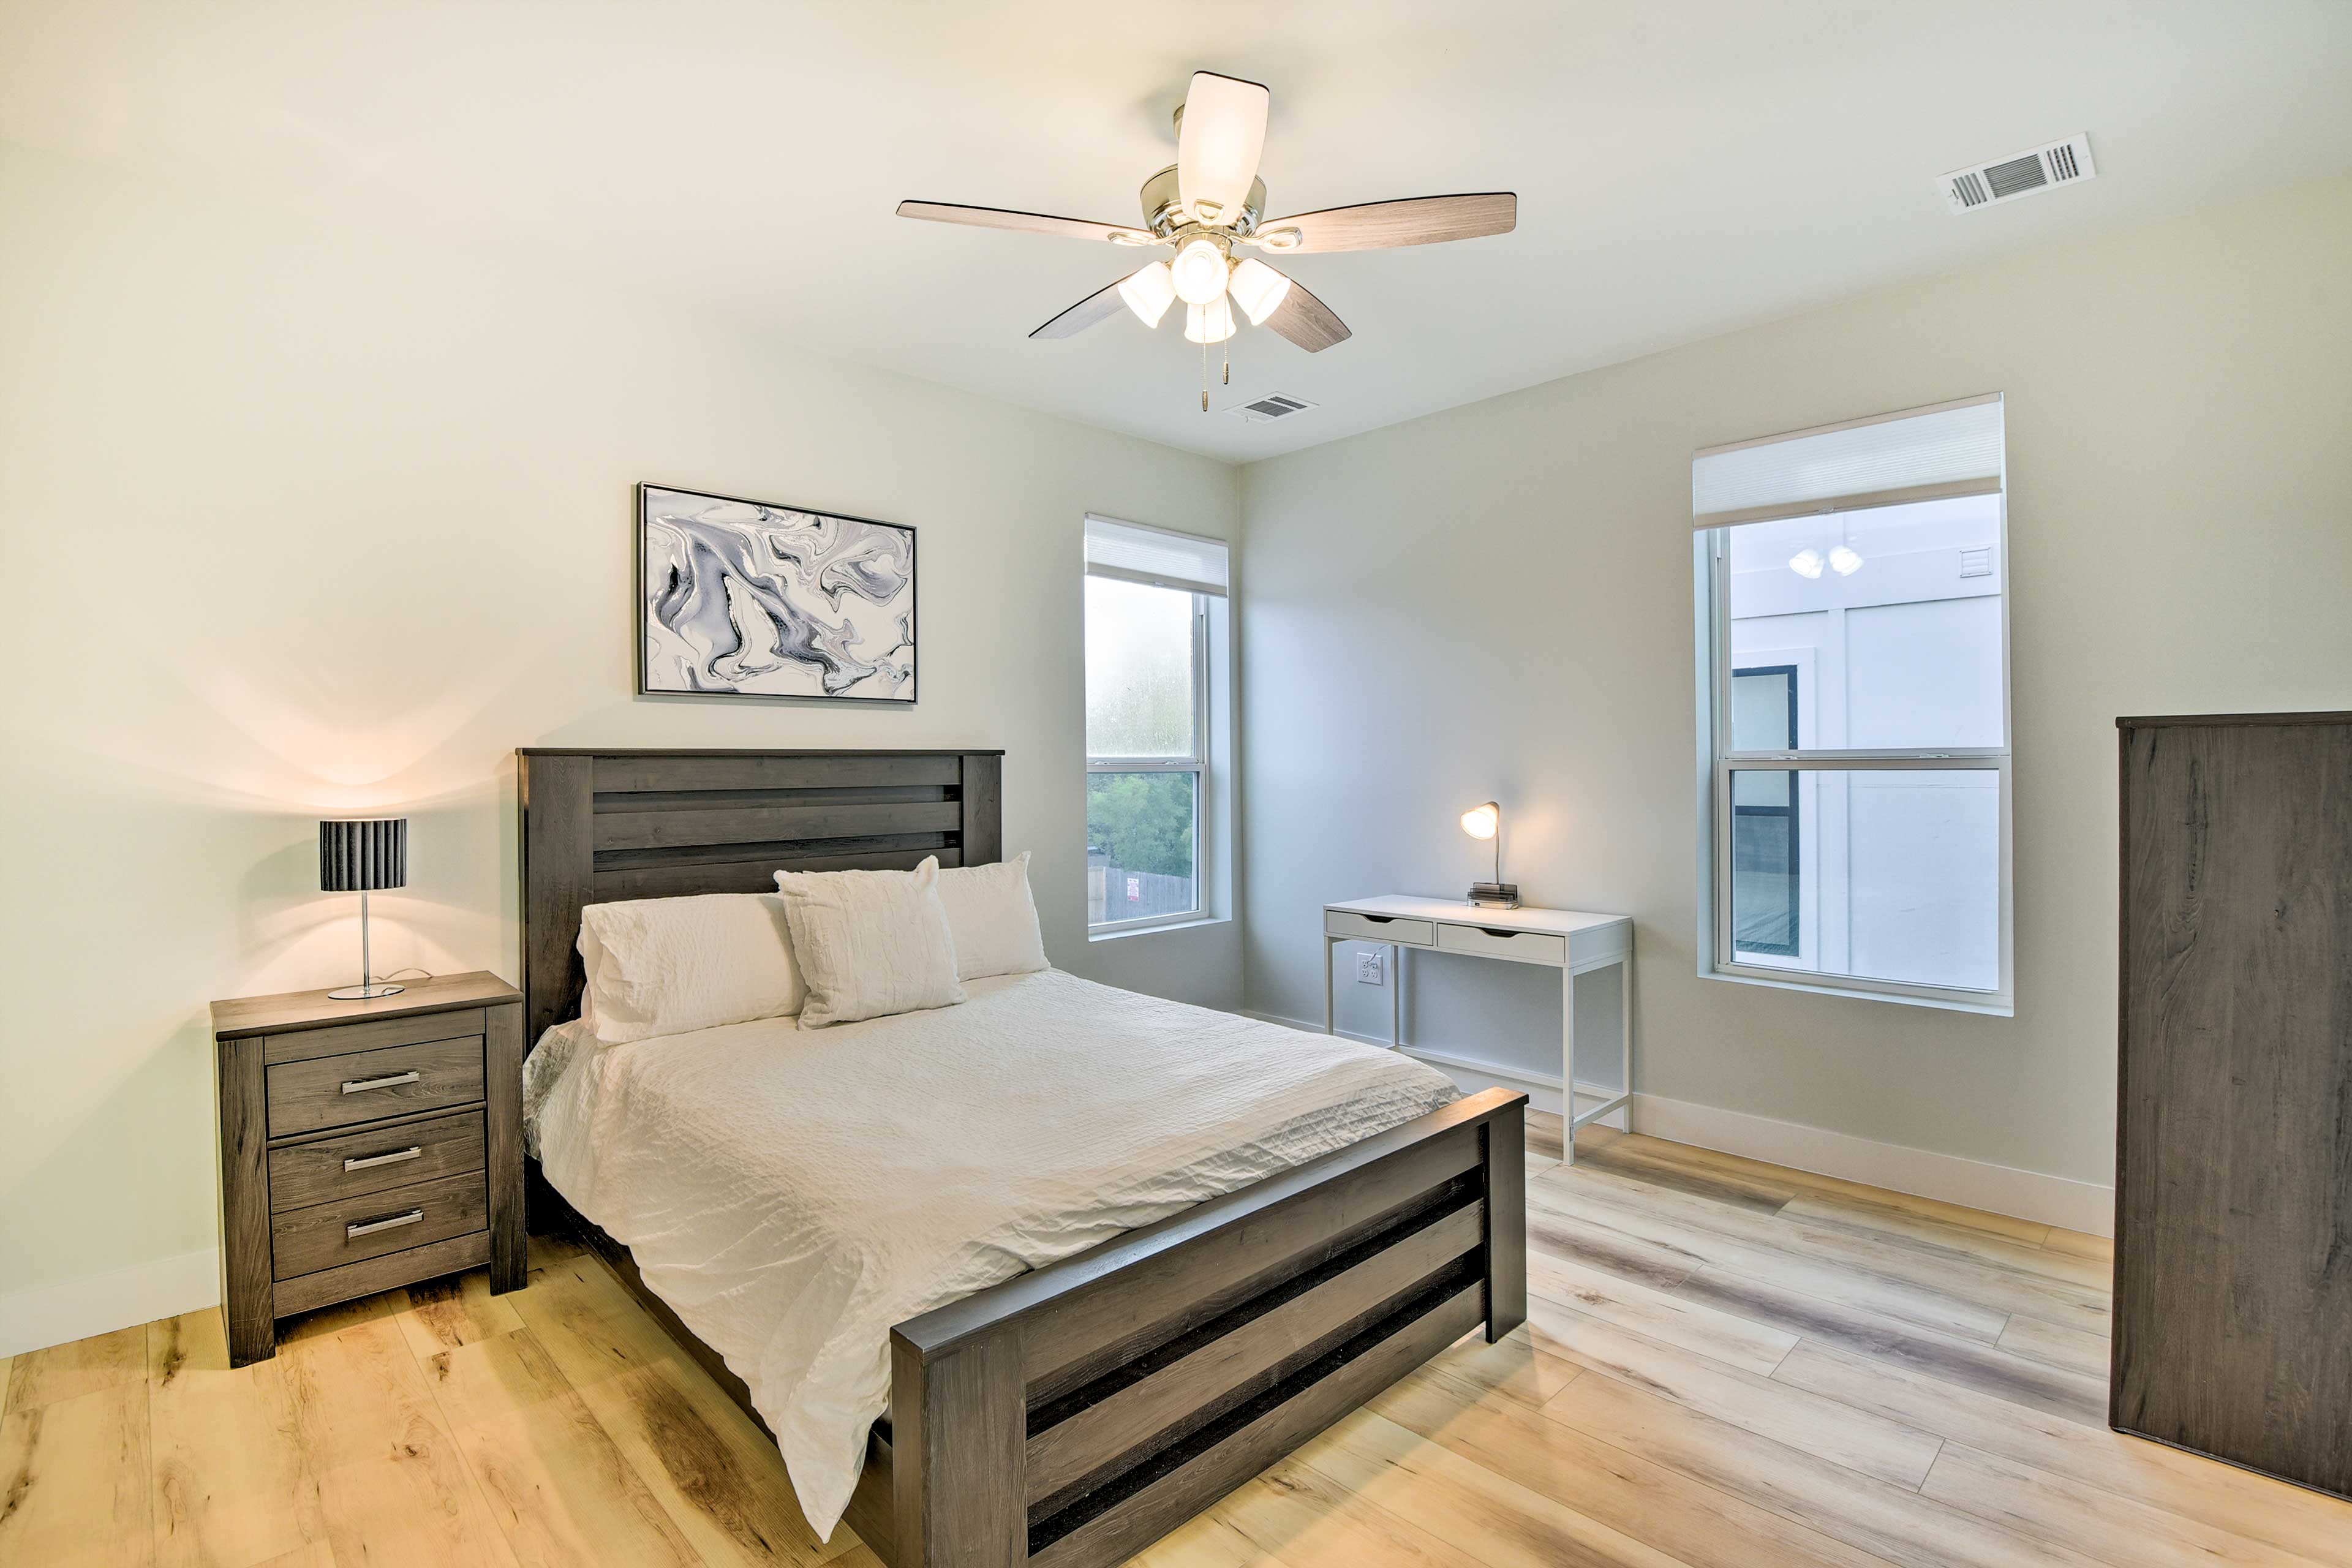 Bedroom | Queen Bed | Linens Provided | Ceiling Fans